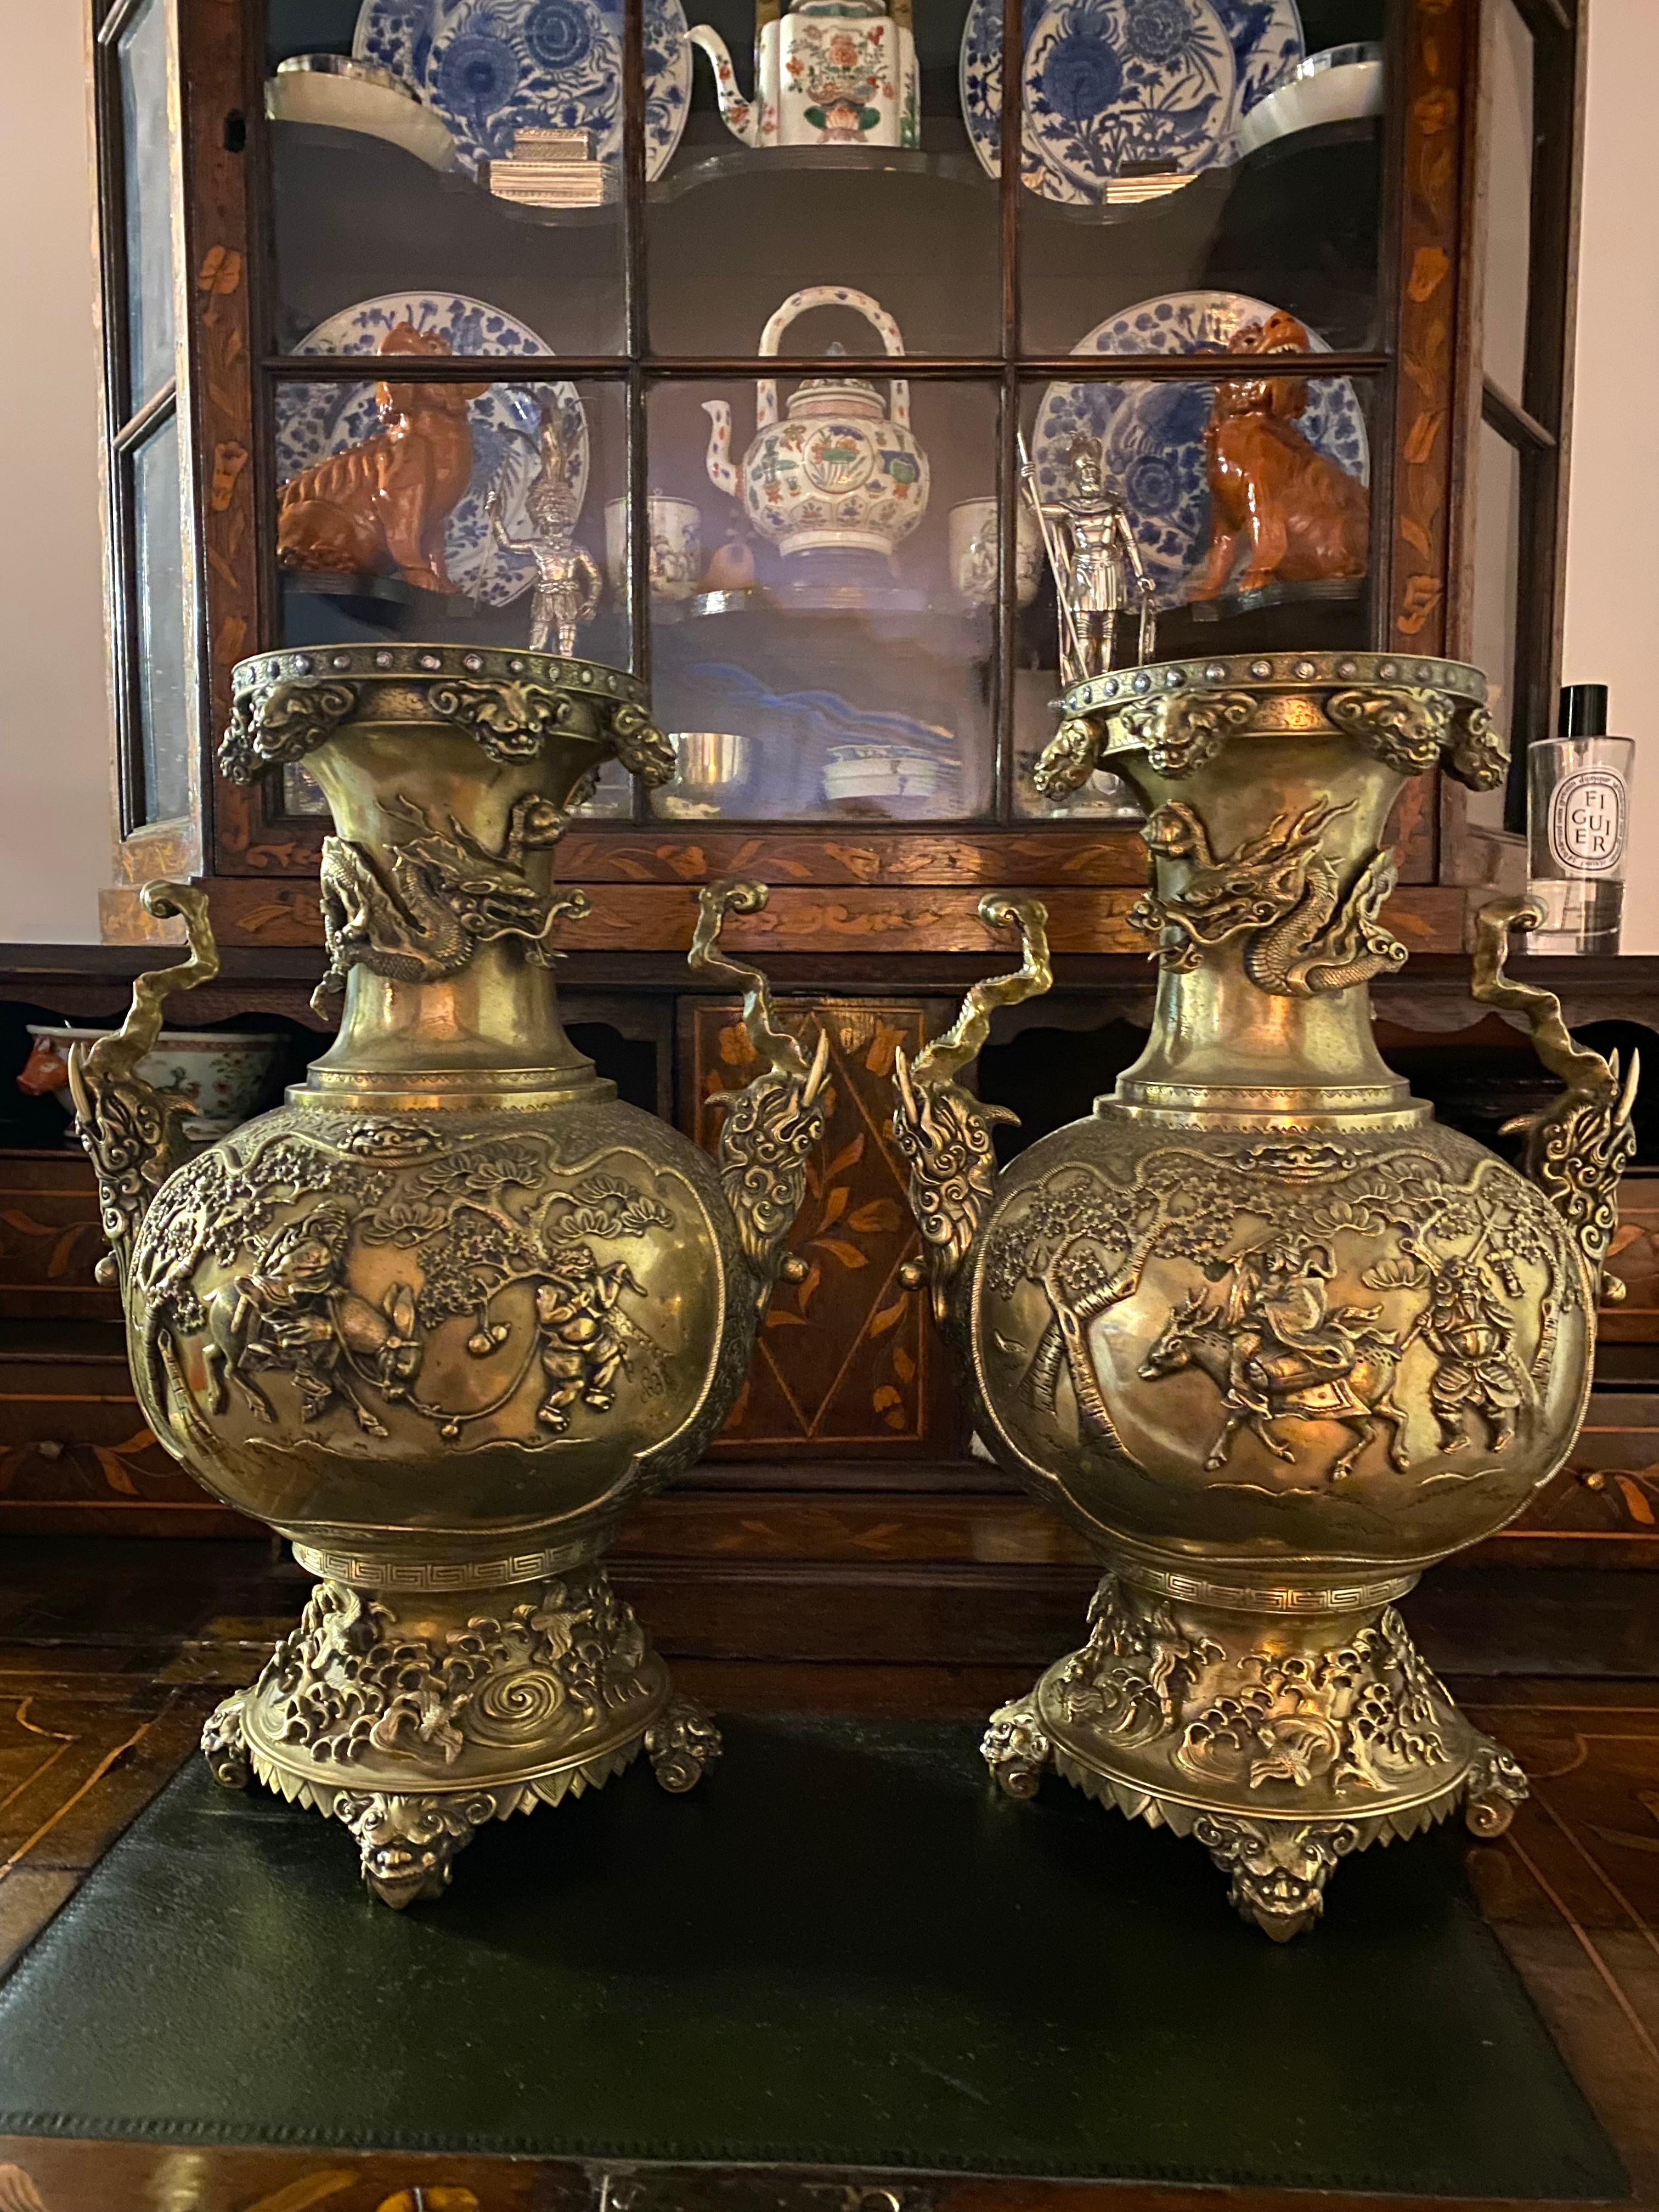 A magnificent pair of bronze 19th century Japanese vases.
Flared rim with geometric decoration to the edge with silver detailing,leading down to fine relief landscape scenes of birds, trees, floral and foliate chasing,
With superb cast relief